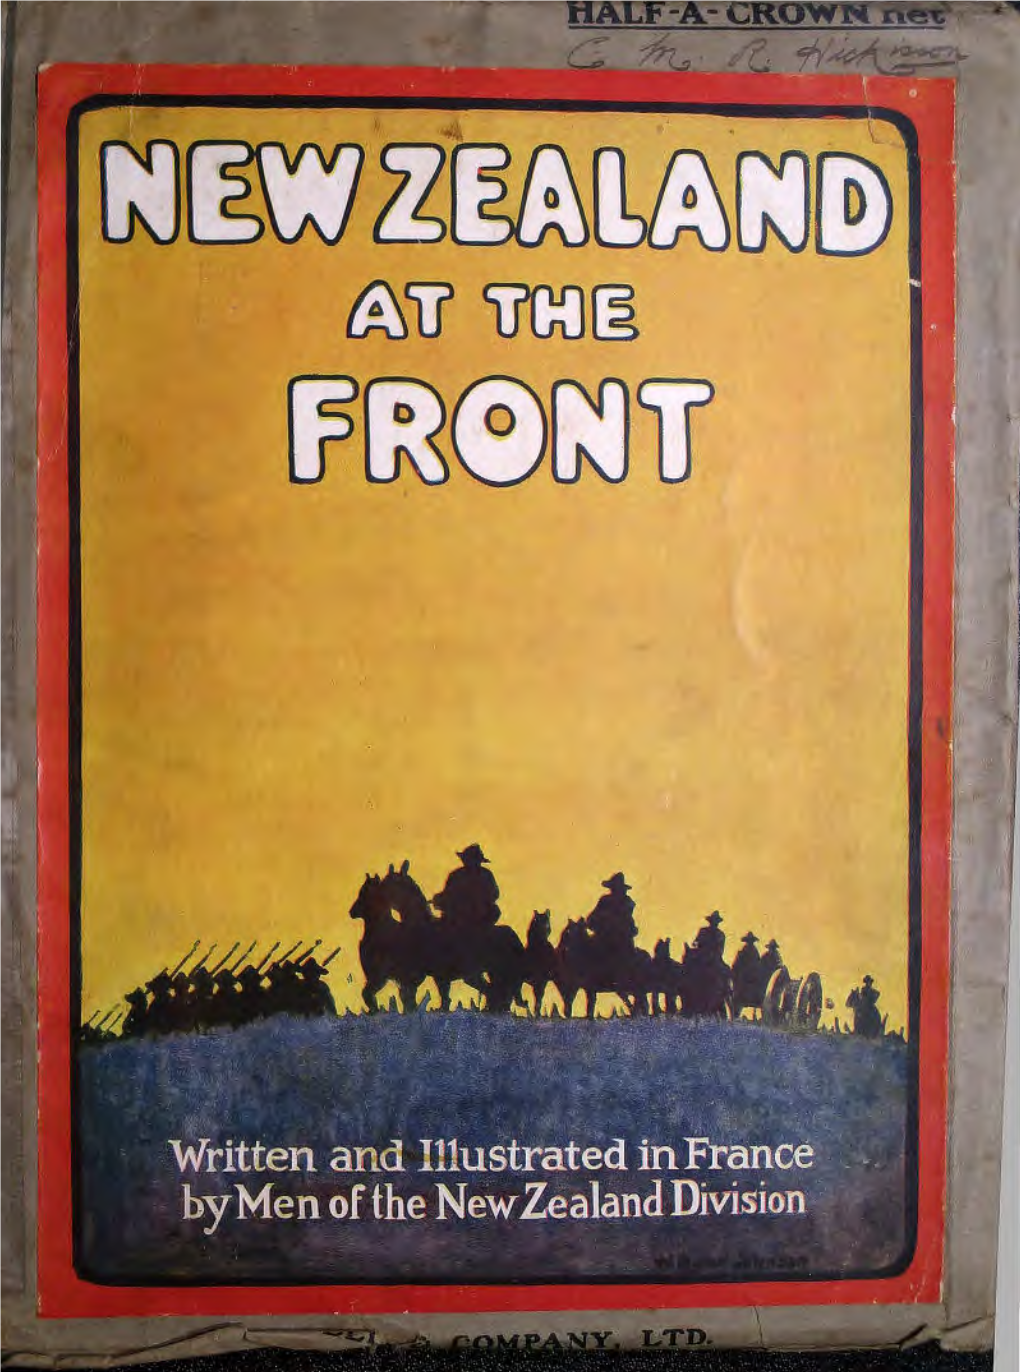 New Zealand at the Front